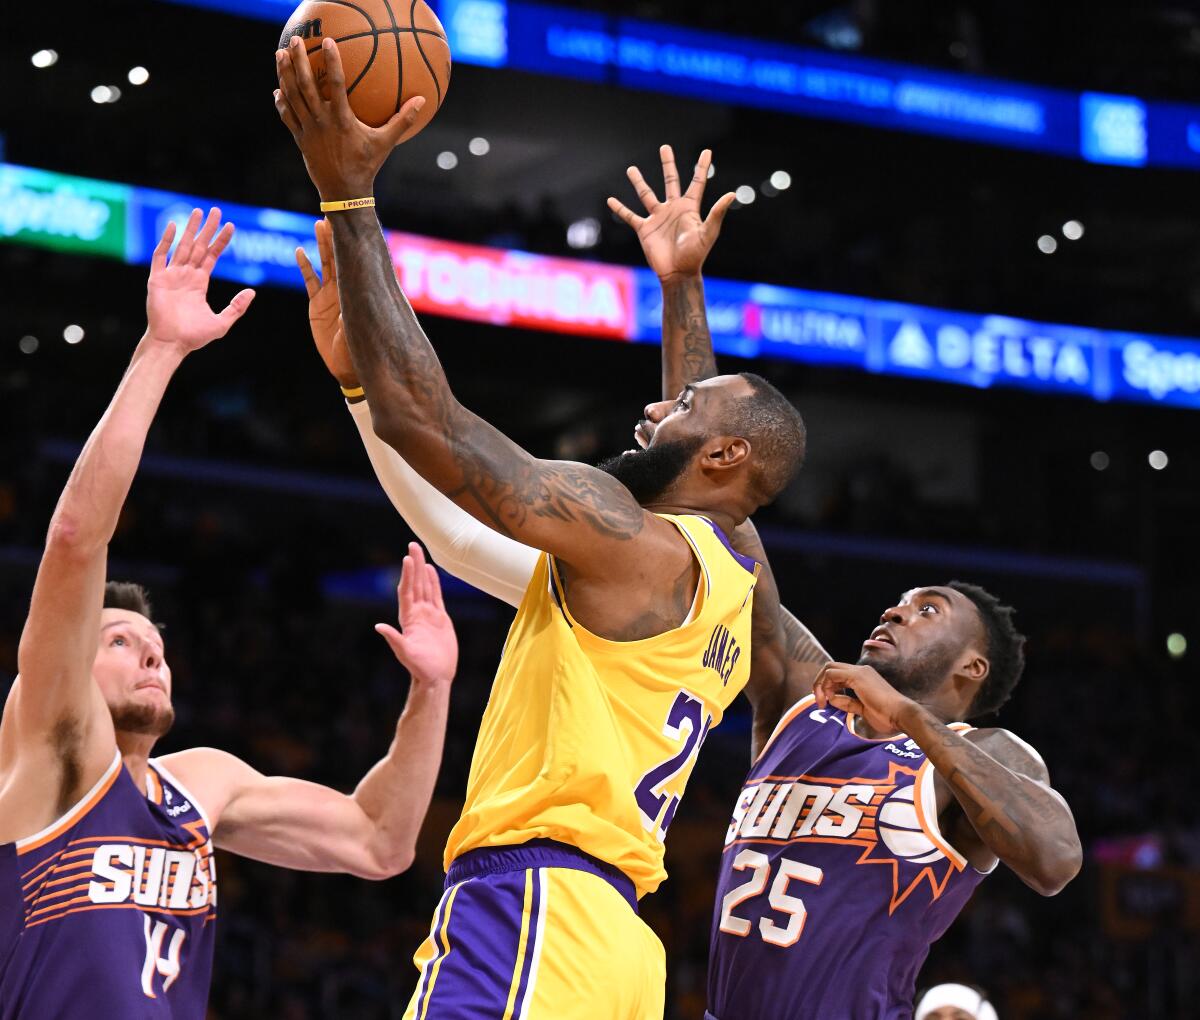 Denver Nuggets overcome deficit, send Lakers home down 2